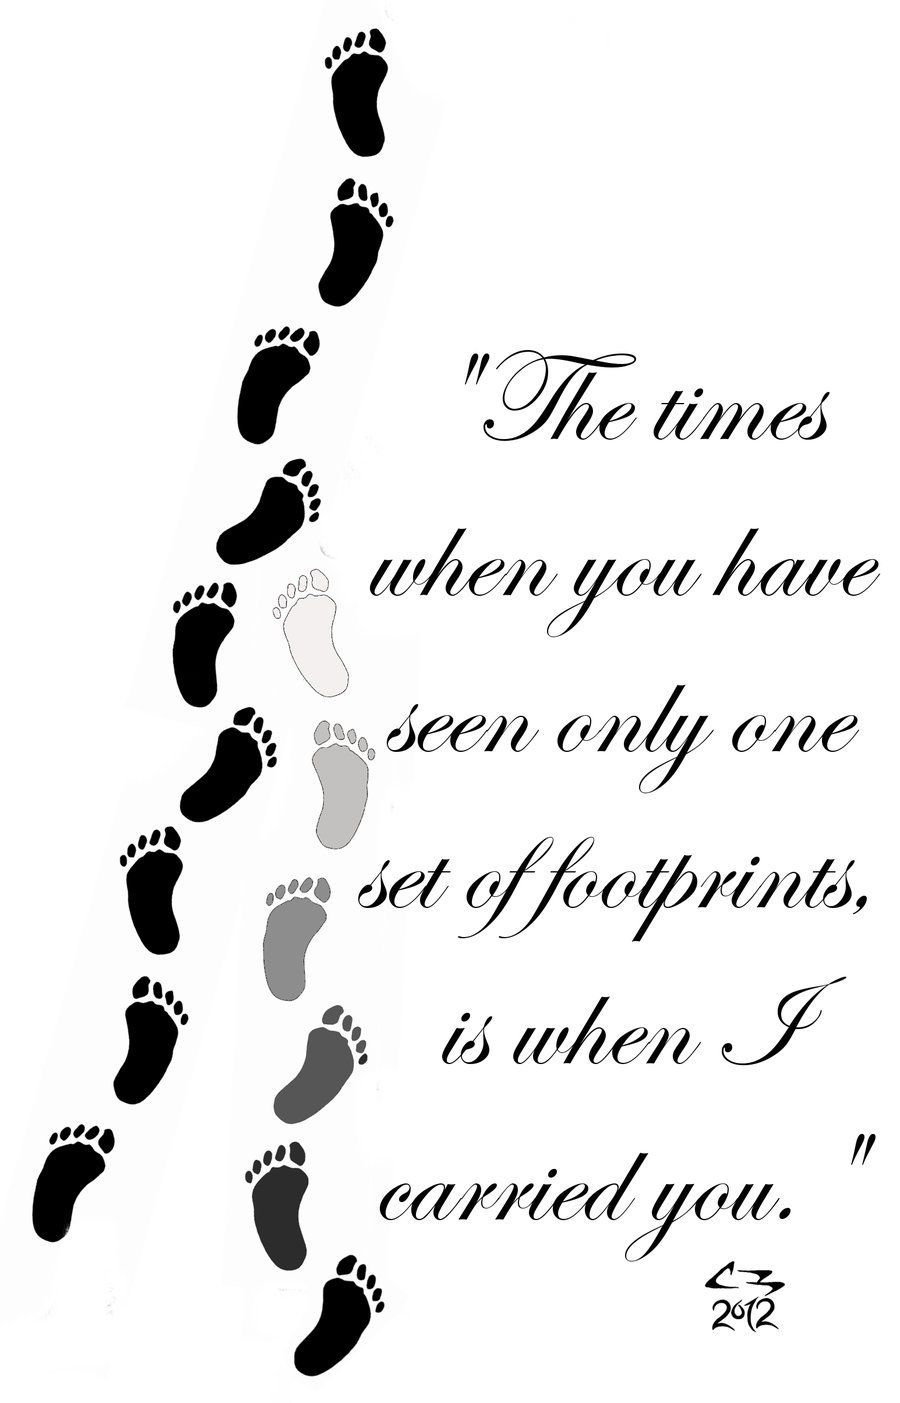 Foot prints in the sand.  If I were to get another religious tattoo, this would